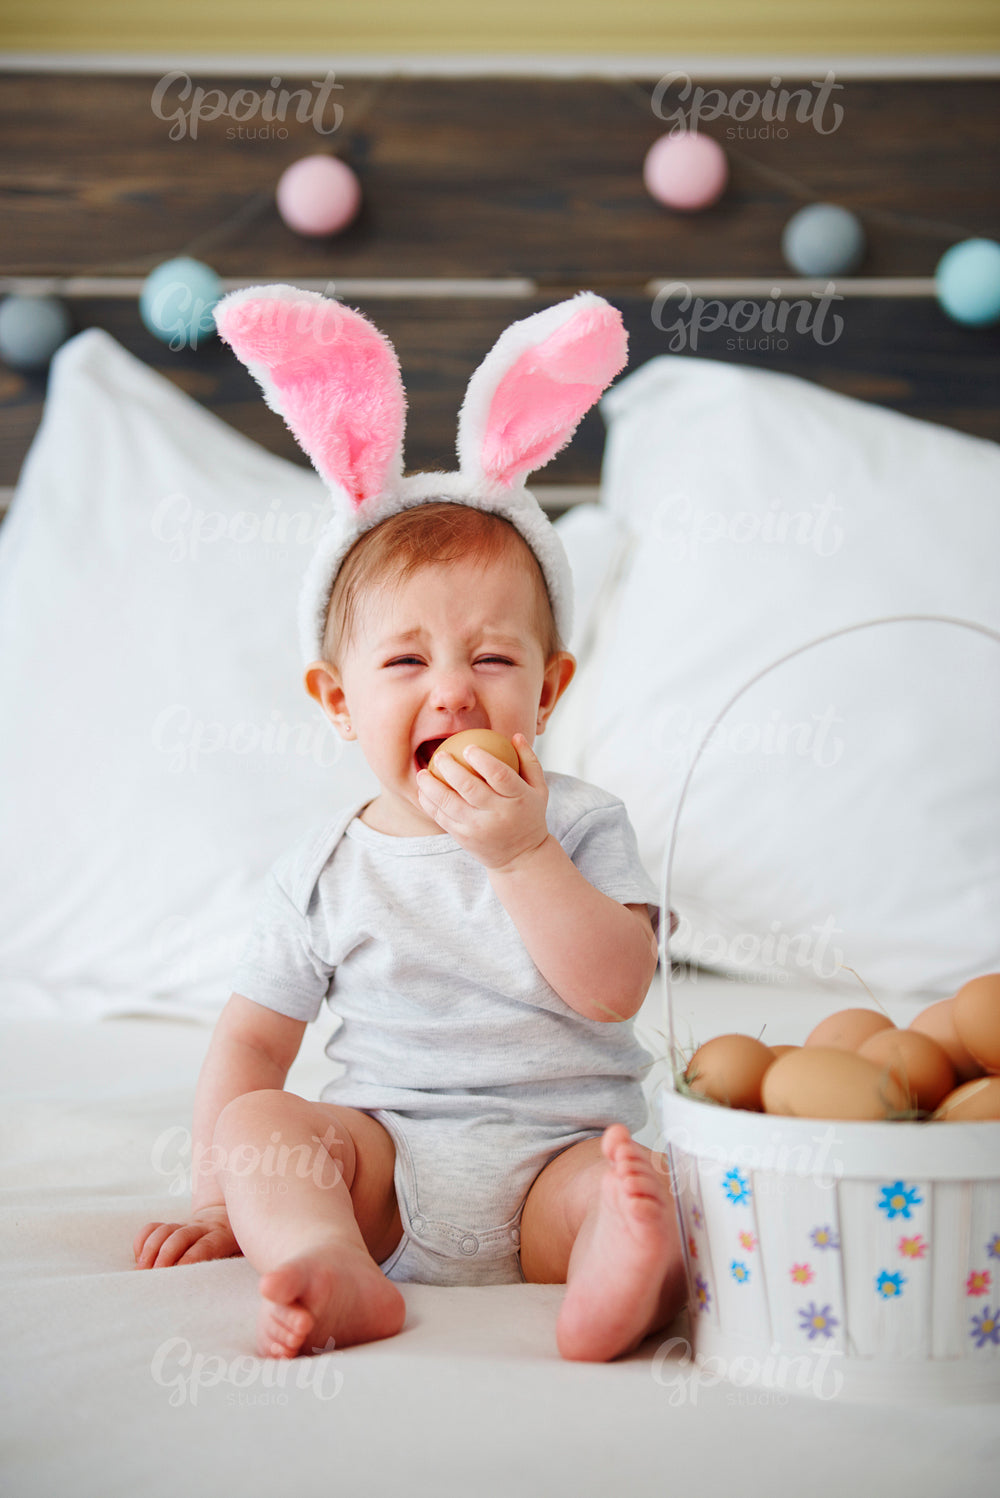 Crying baby eating an egg in bed